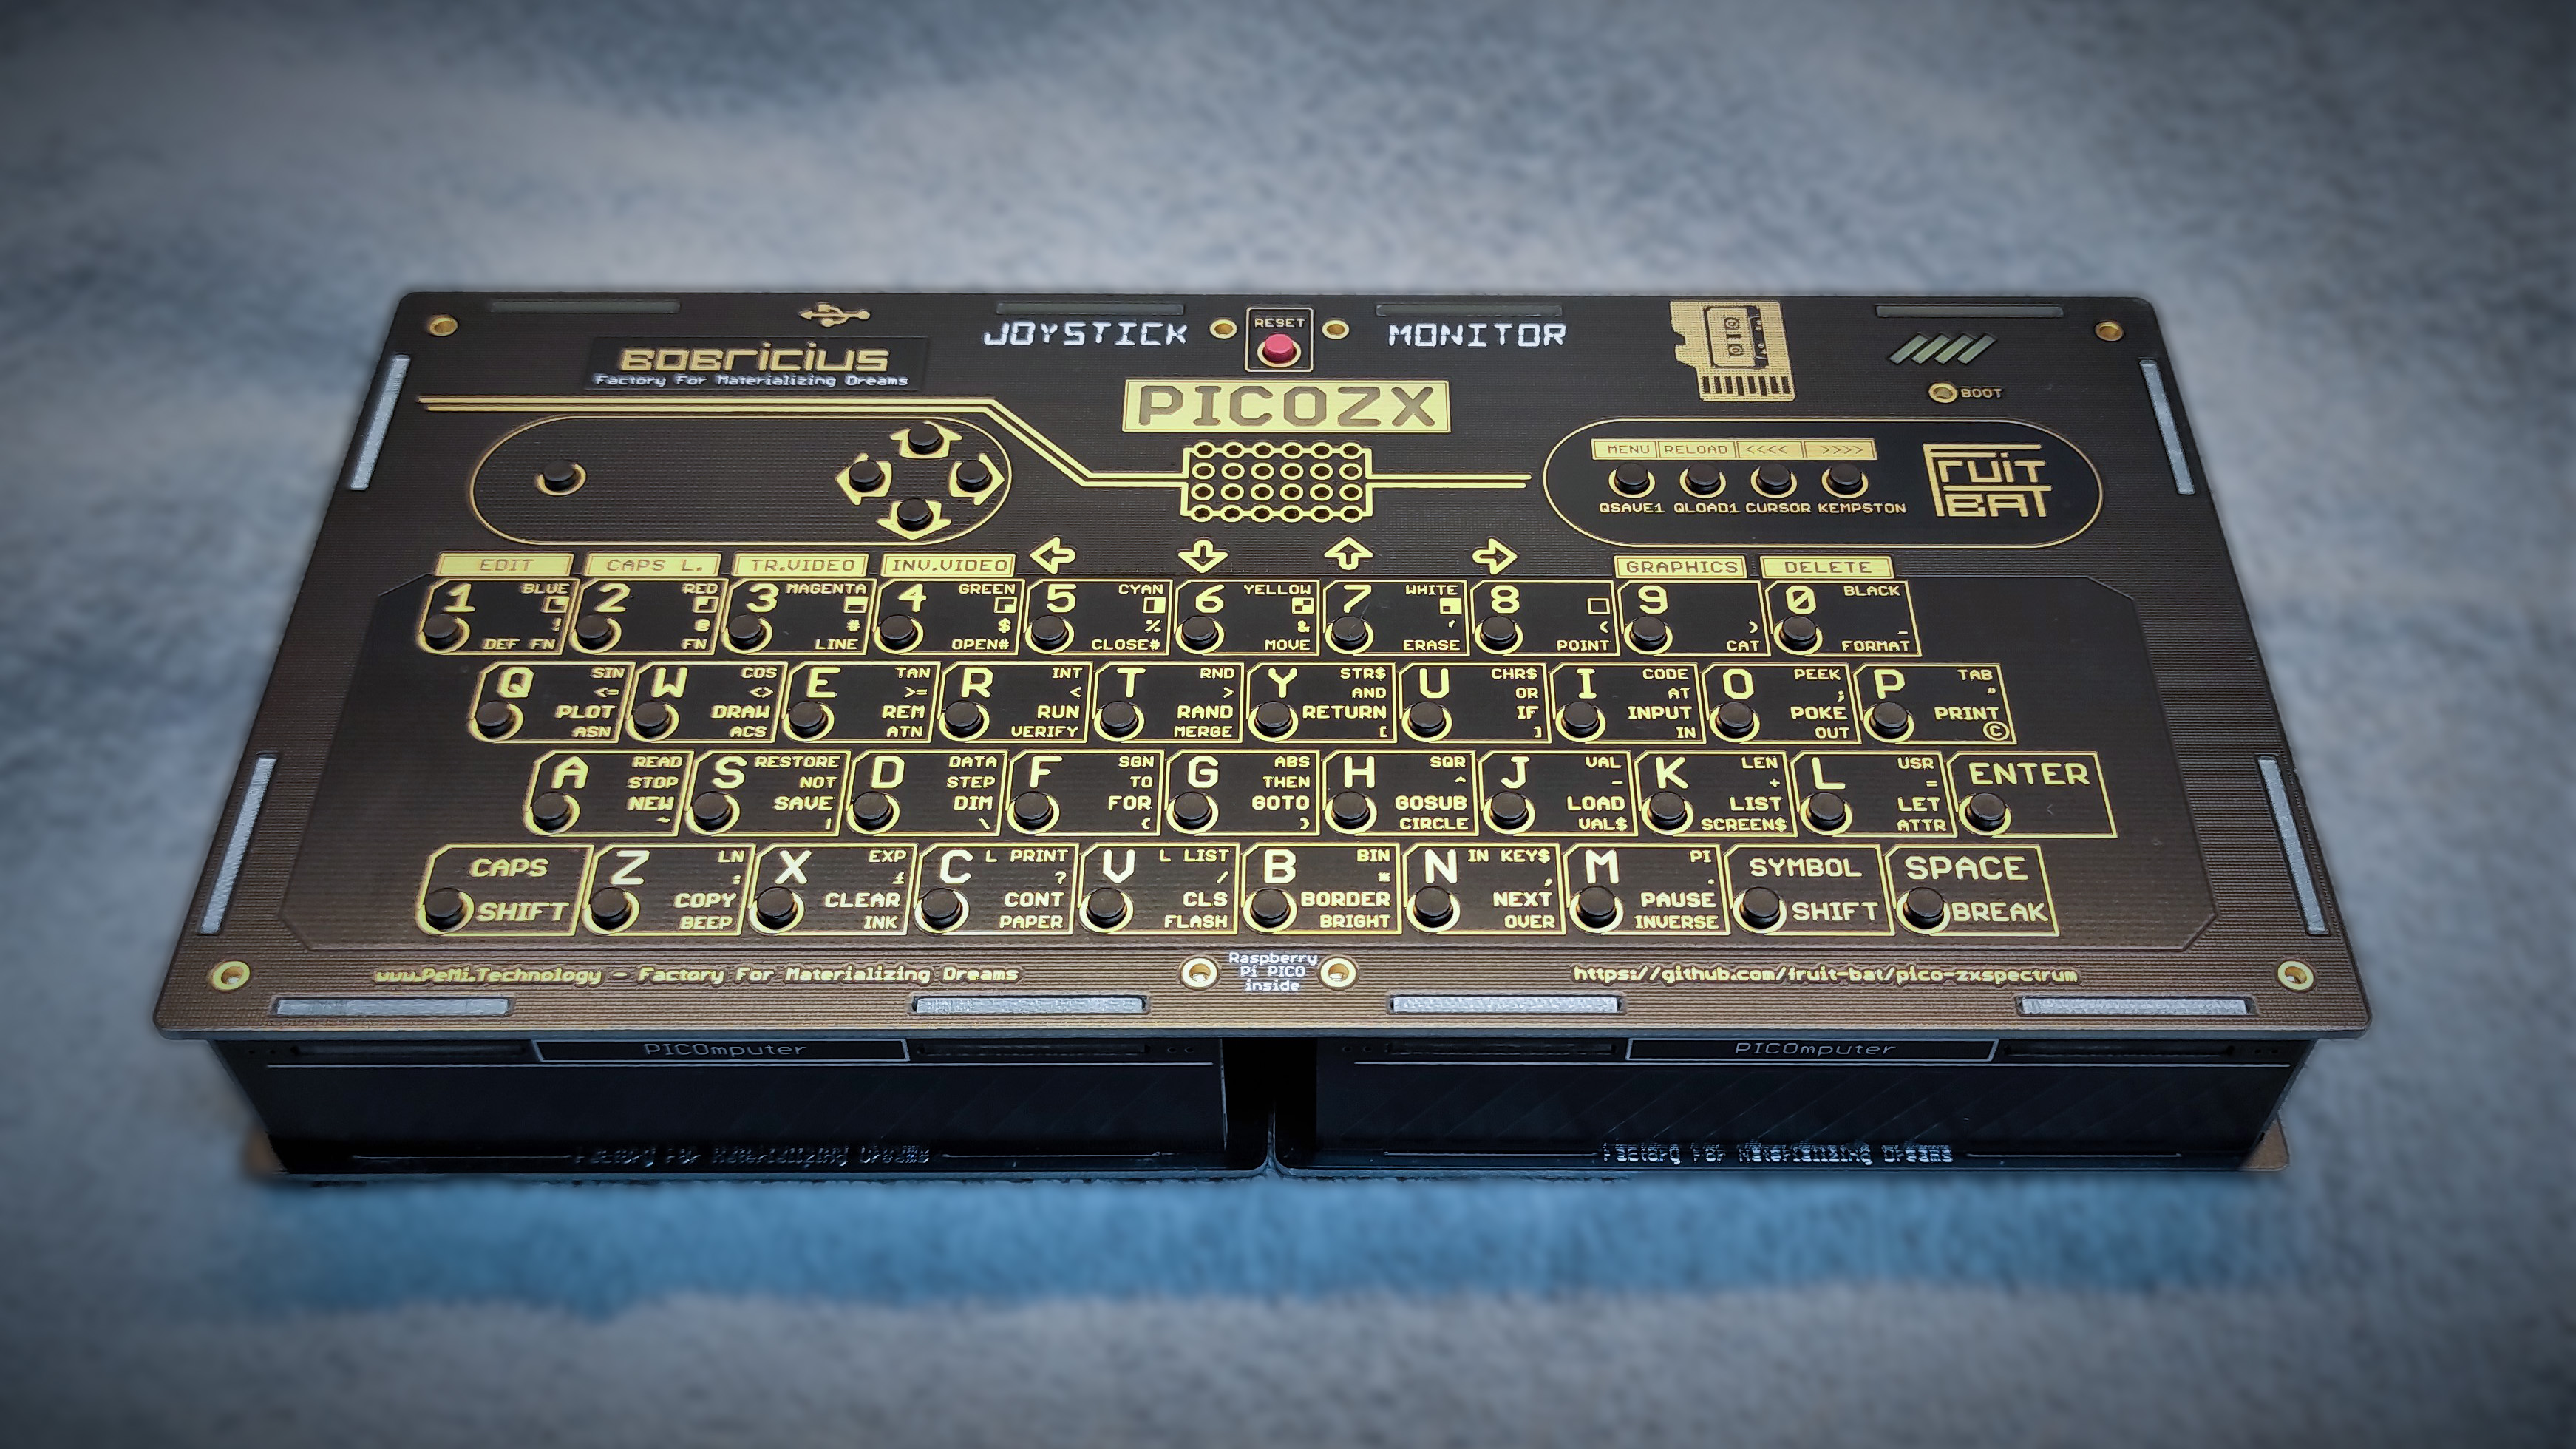 Pico ZX Spectrum 128K Is a Recreation of the Sinclair Classic 